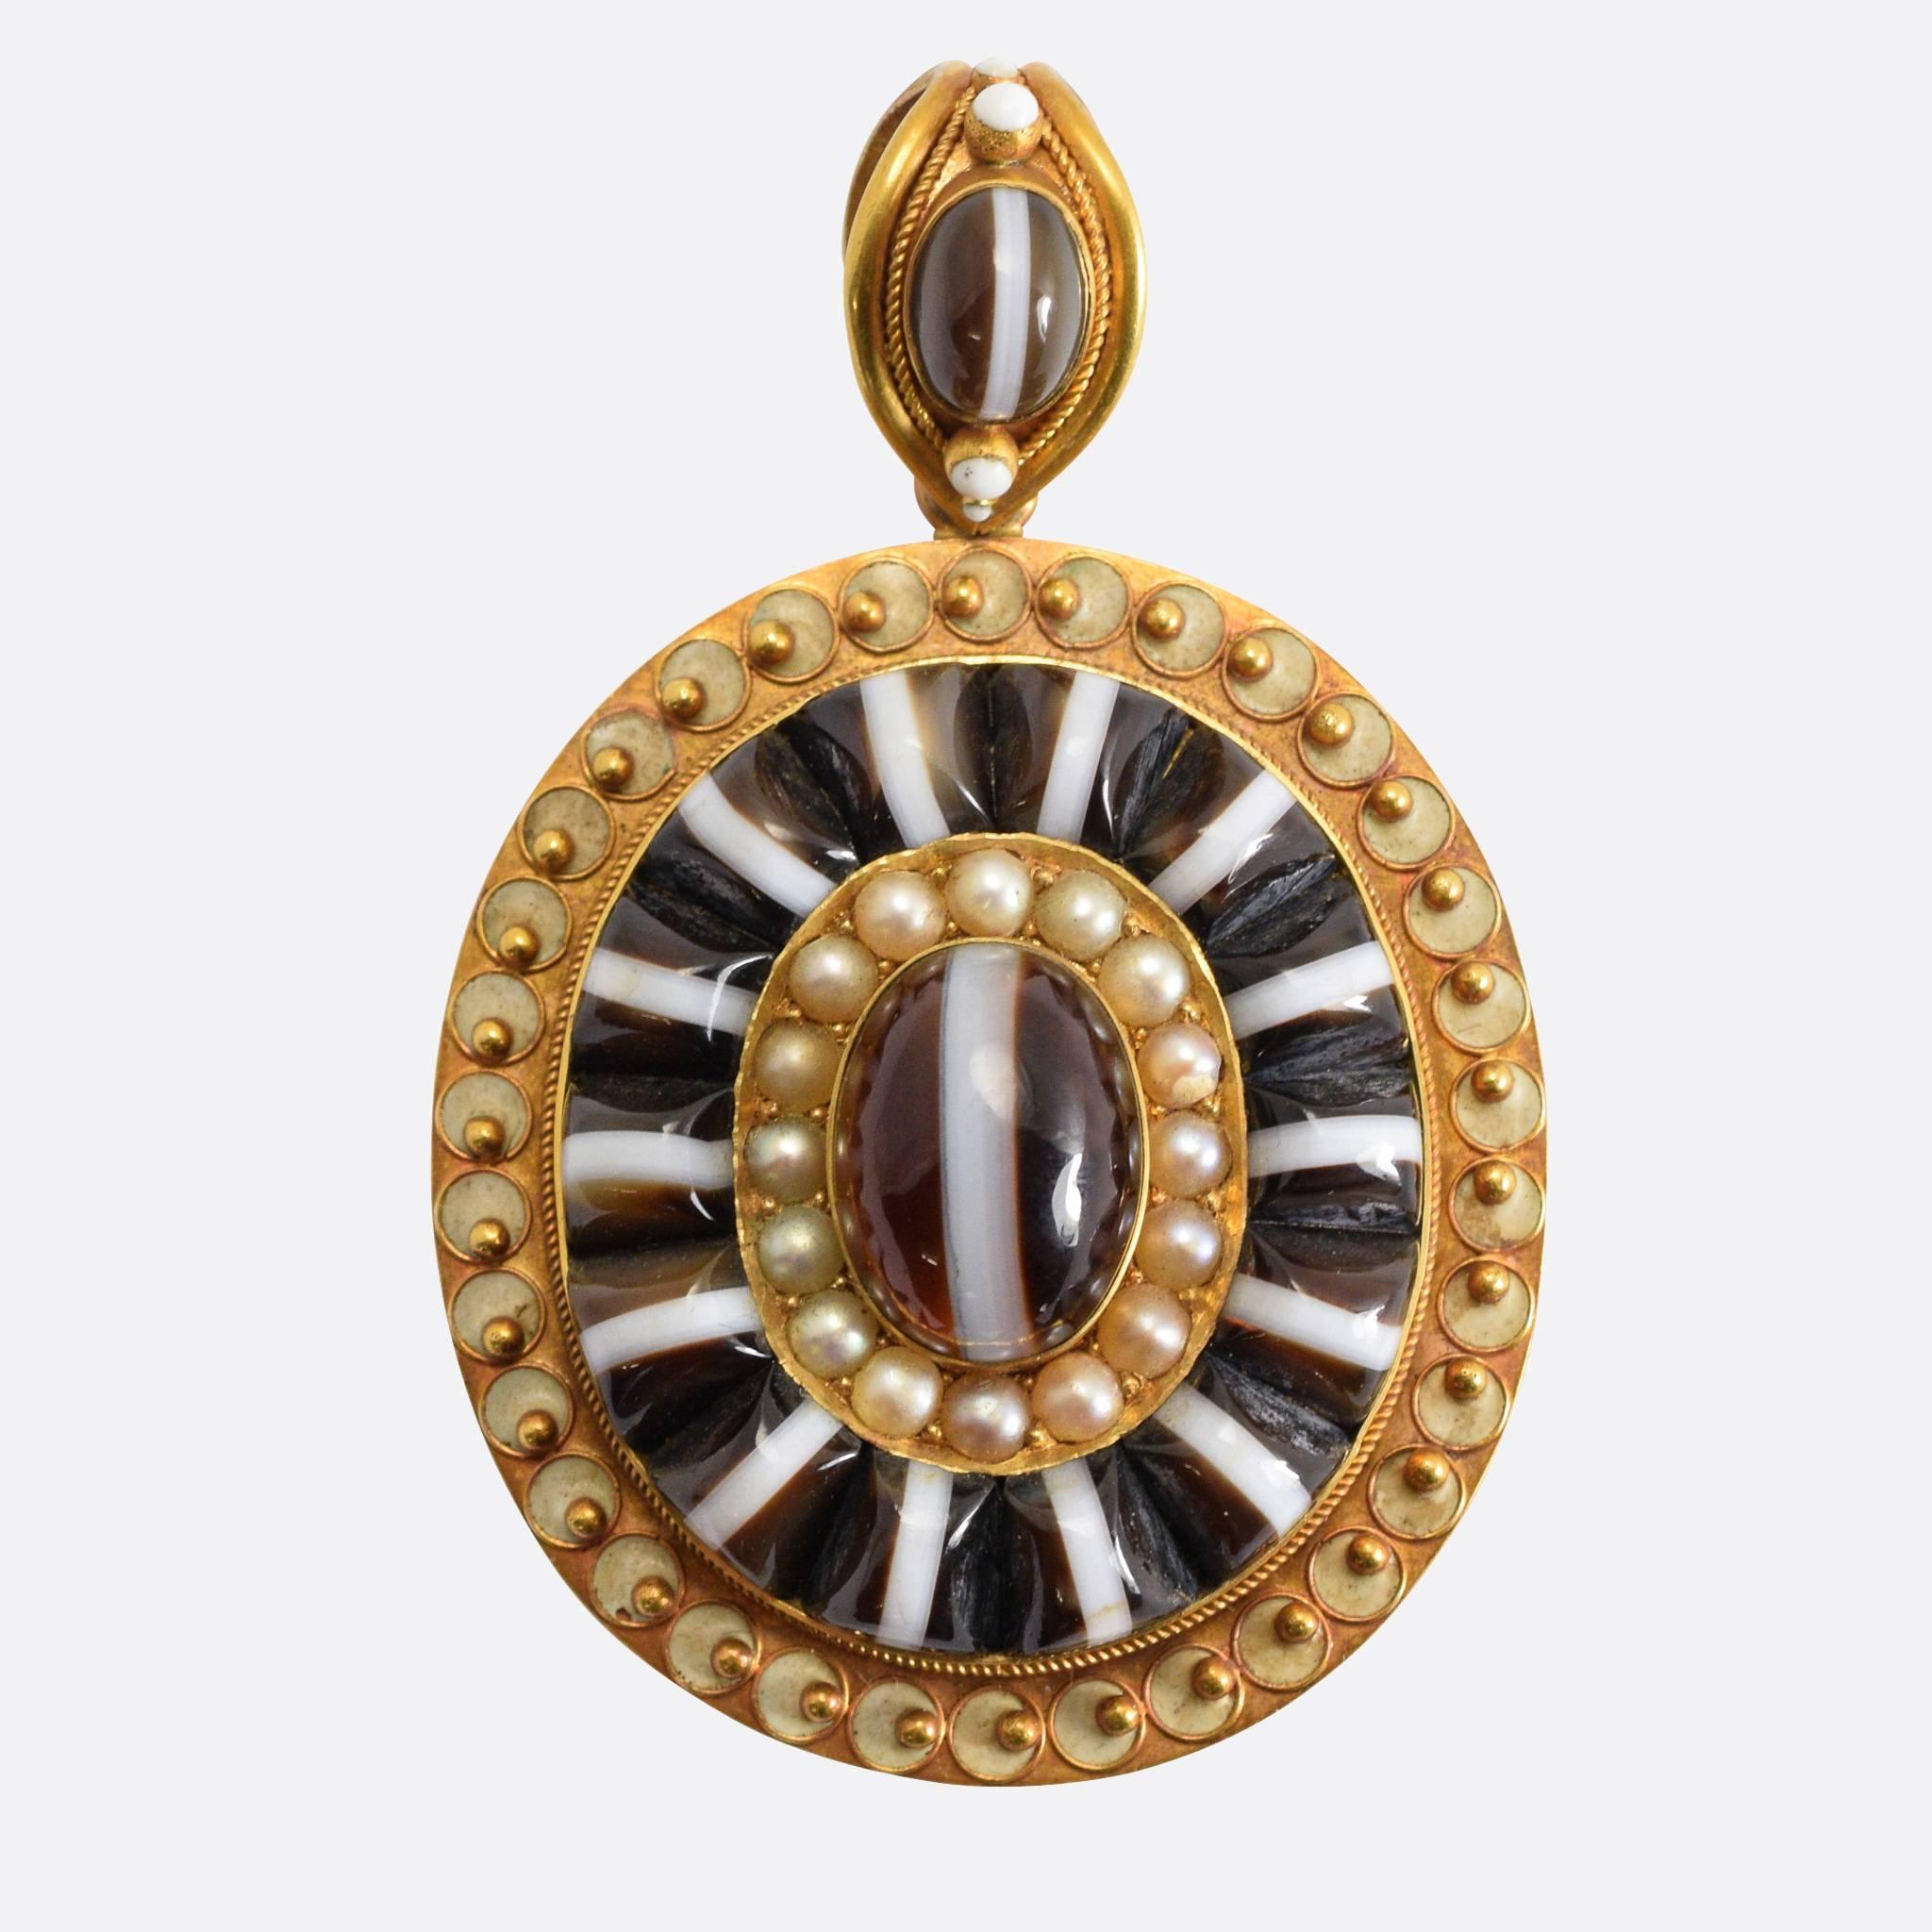 An exceptionally high quality 18k gold etruscan revival locket, the main body set with incredible trapezium cut banded agate cabochons surrounding a central halo of natural pearls. The original bail with rope work detailing, pearls and agate. The